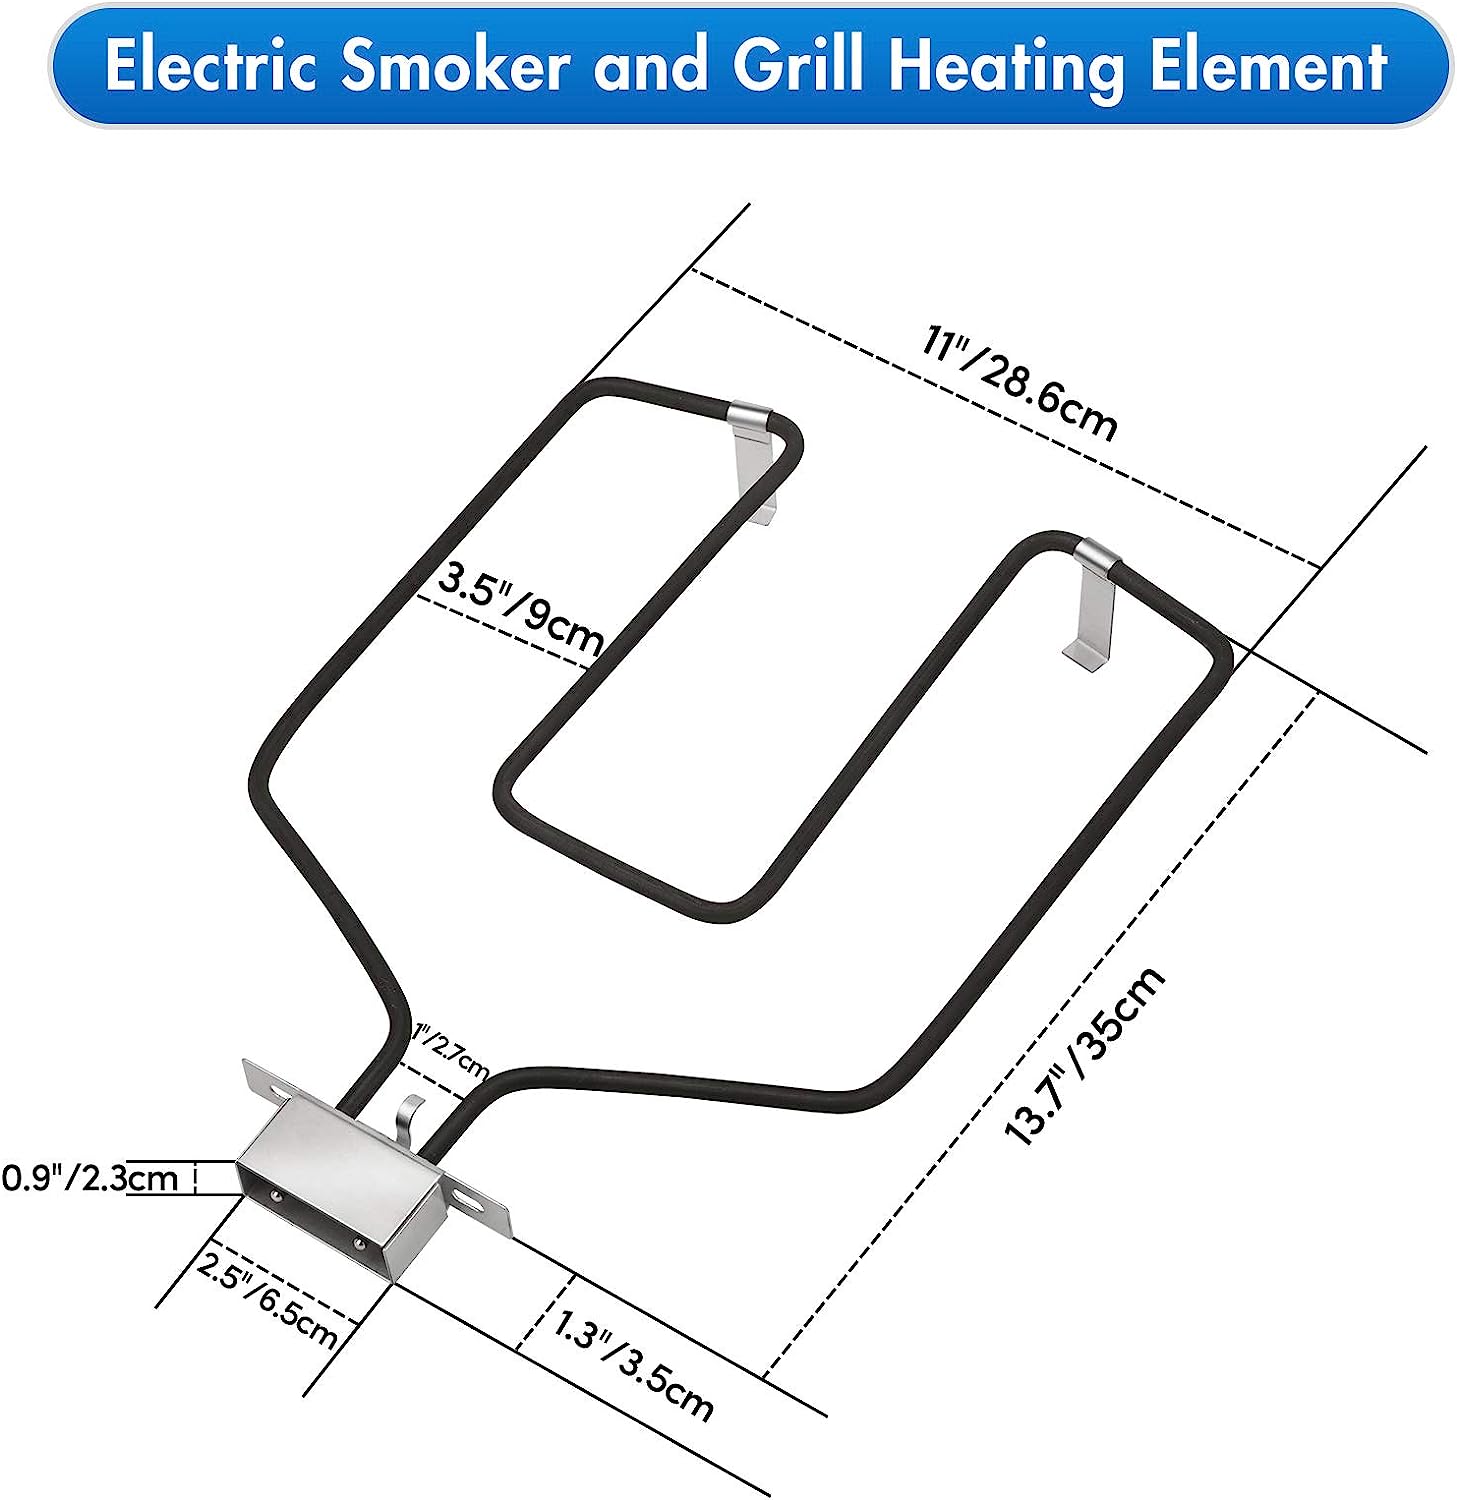 Electric Smoker Heating Element Accessories with Adjustable